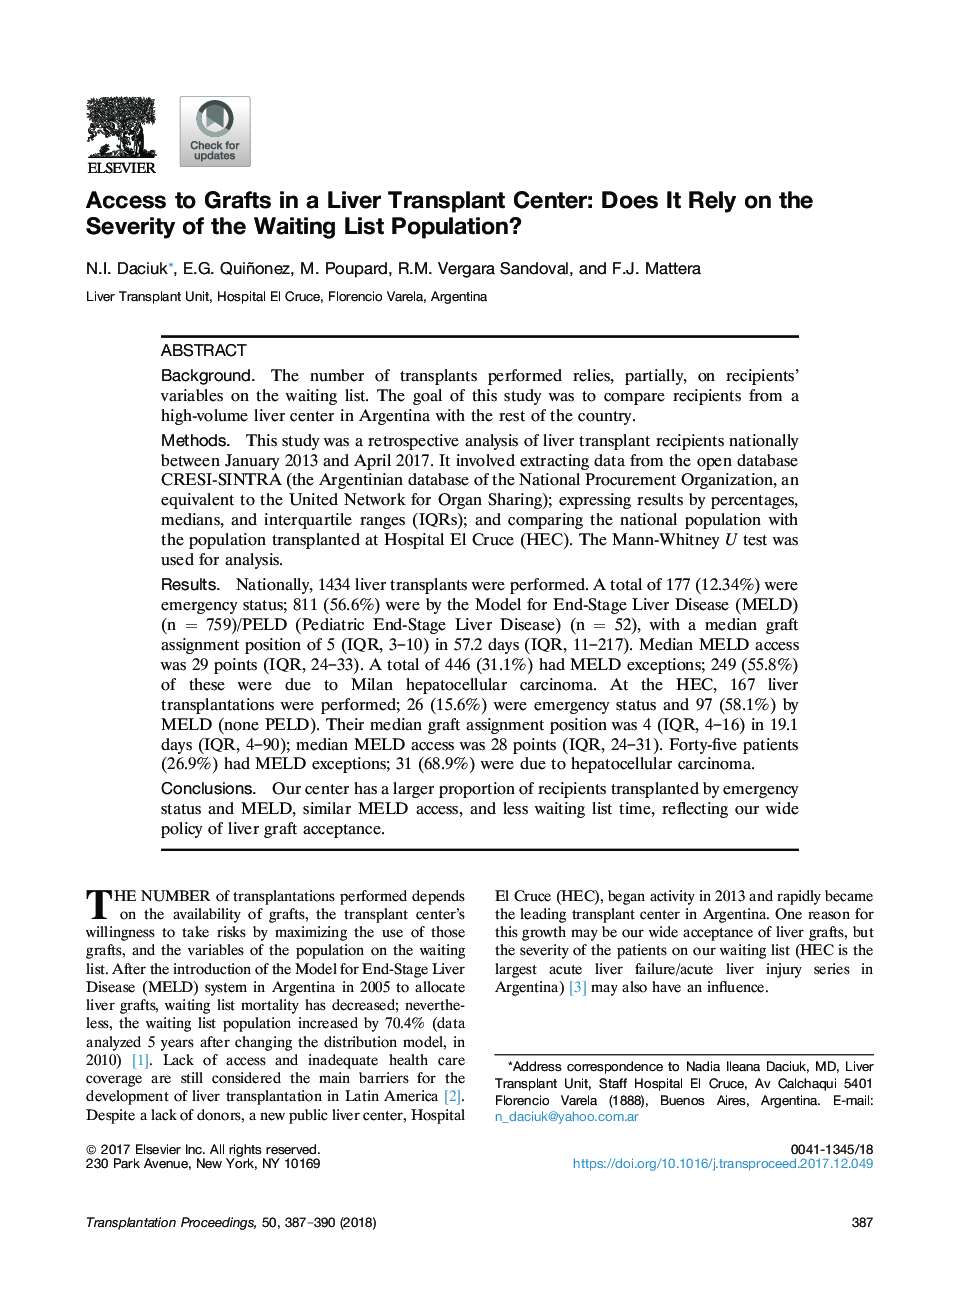 Access to Grafts in a Liver Transplant Center: Does It Rely on the Severity of the Waiting List Population?